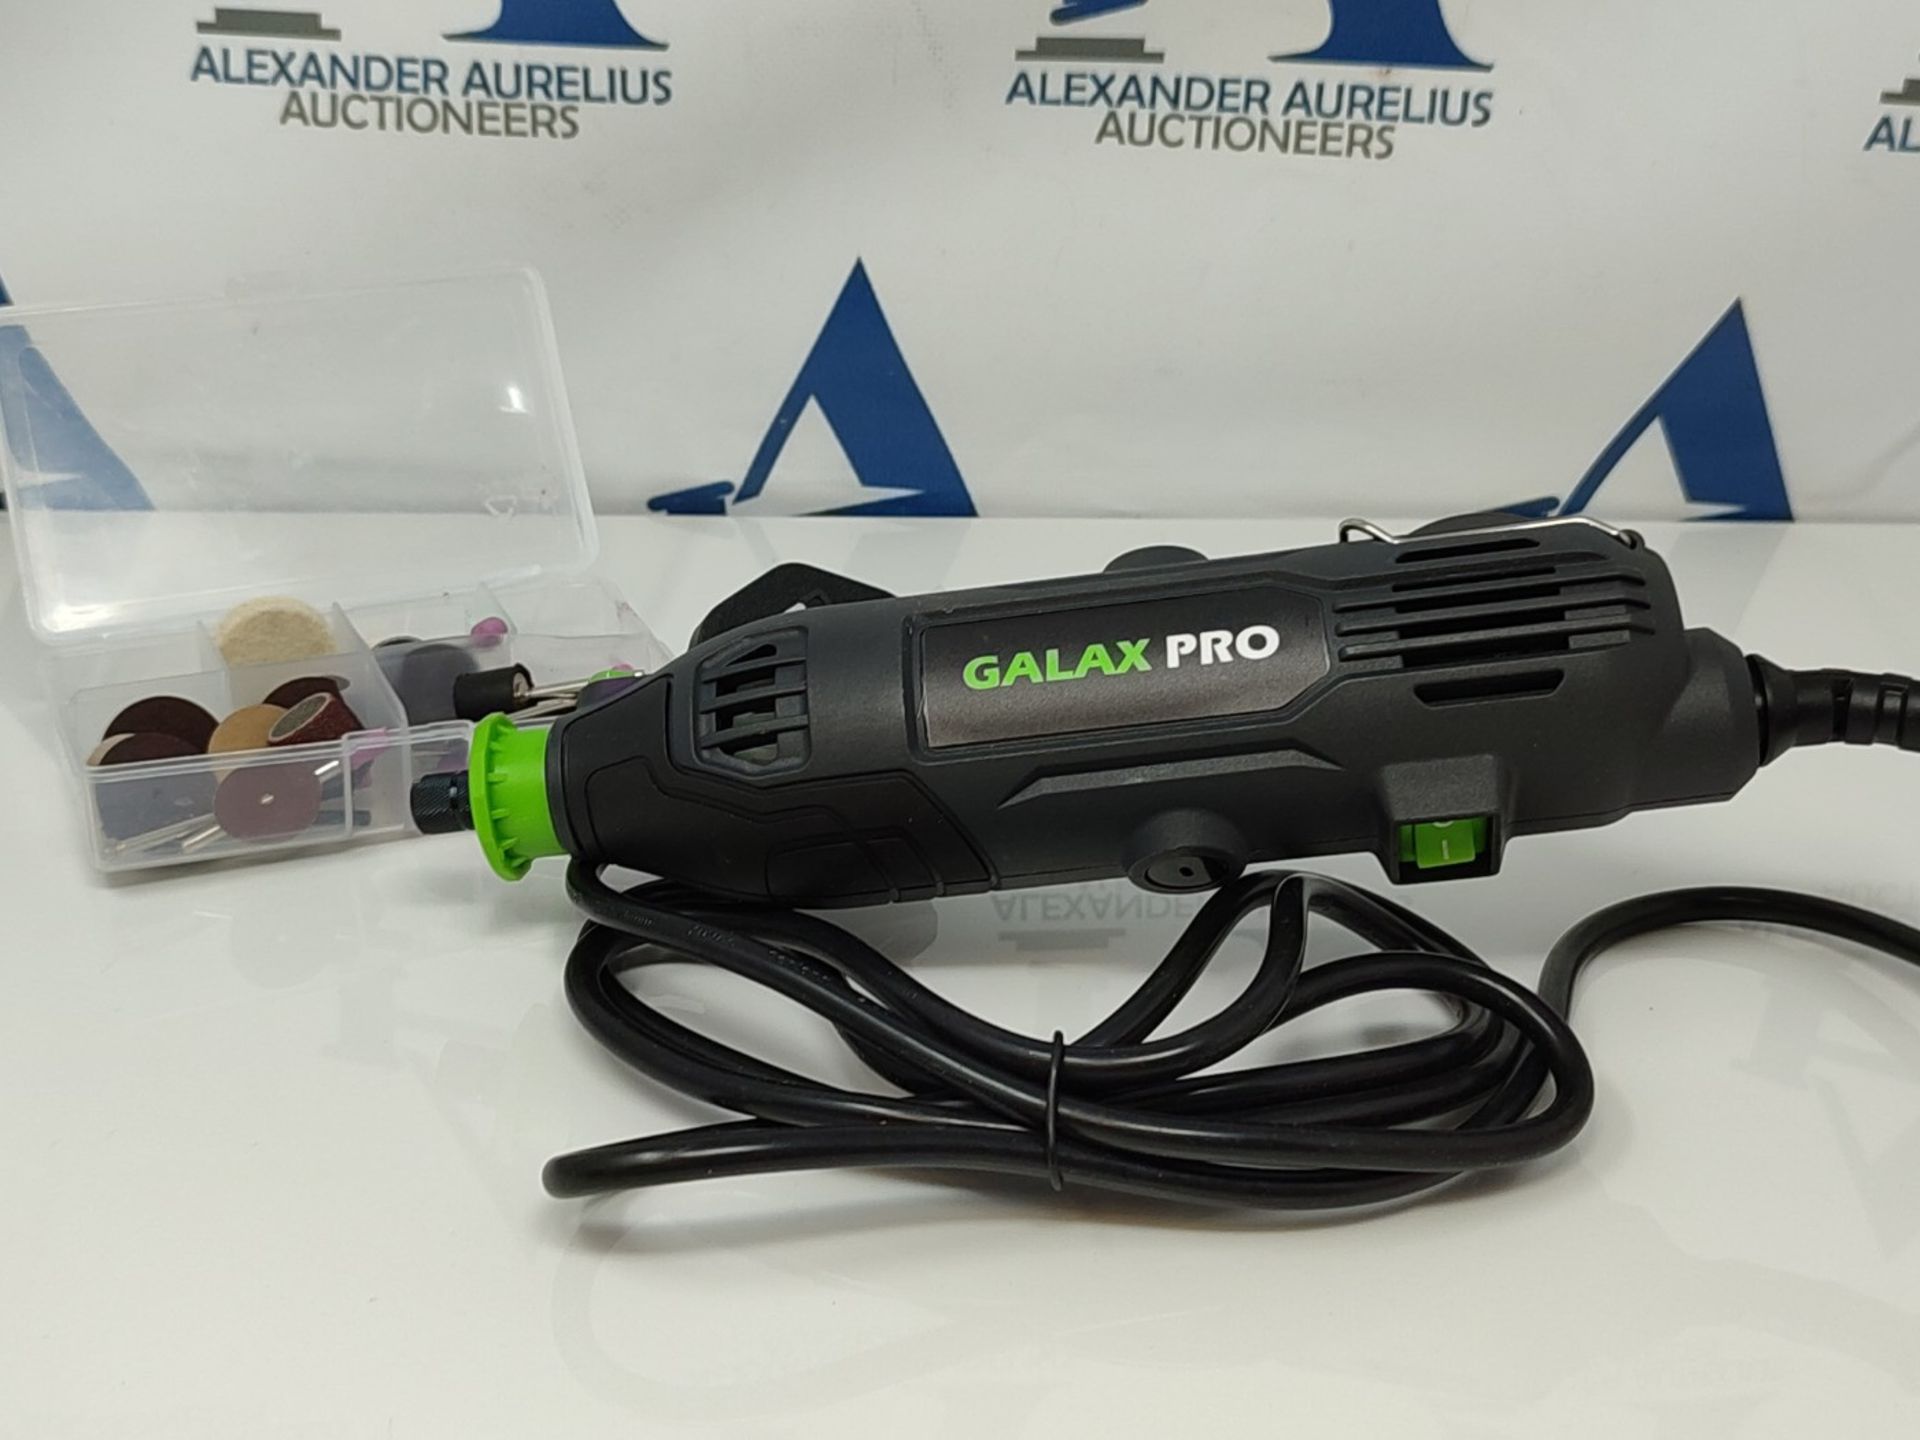 GALAX PRO Rotary Tool Kit, 135W Variable Speed Control 8000-35000 RPM Rotary Tool with